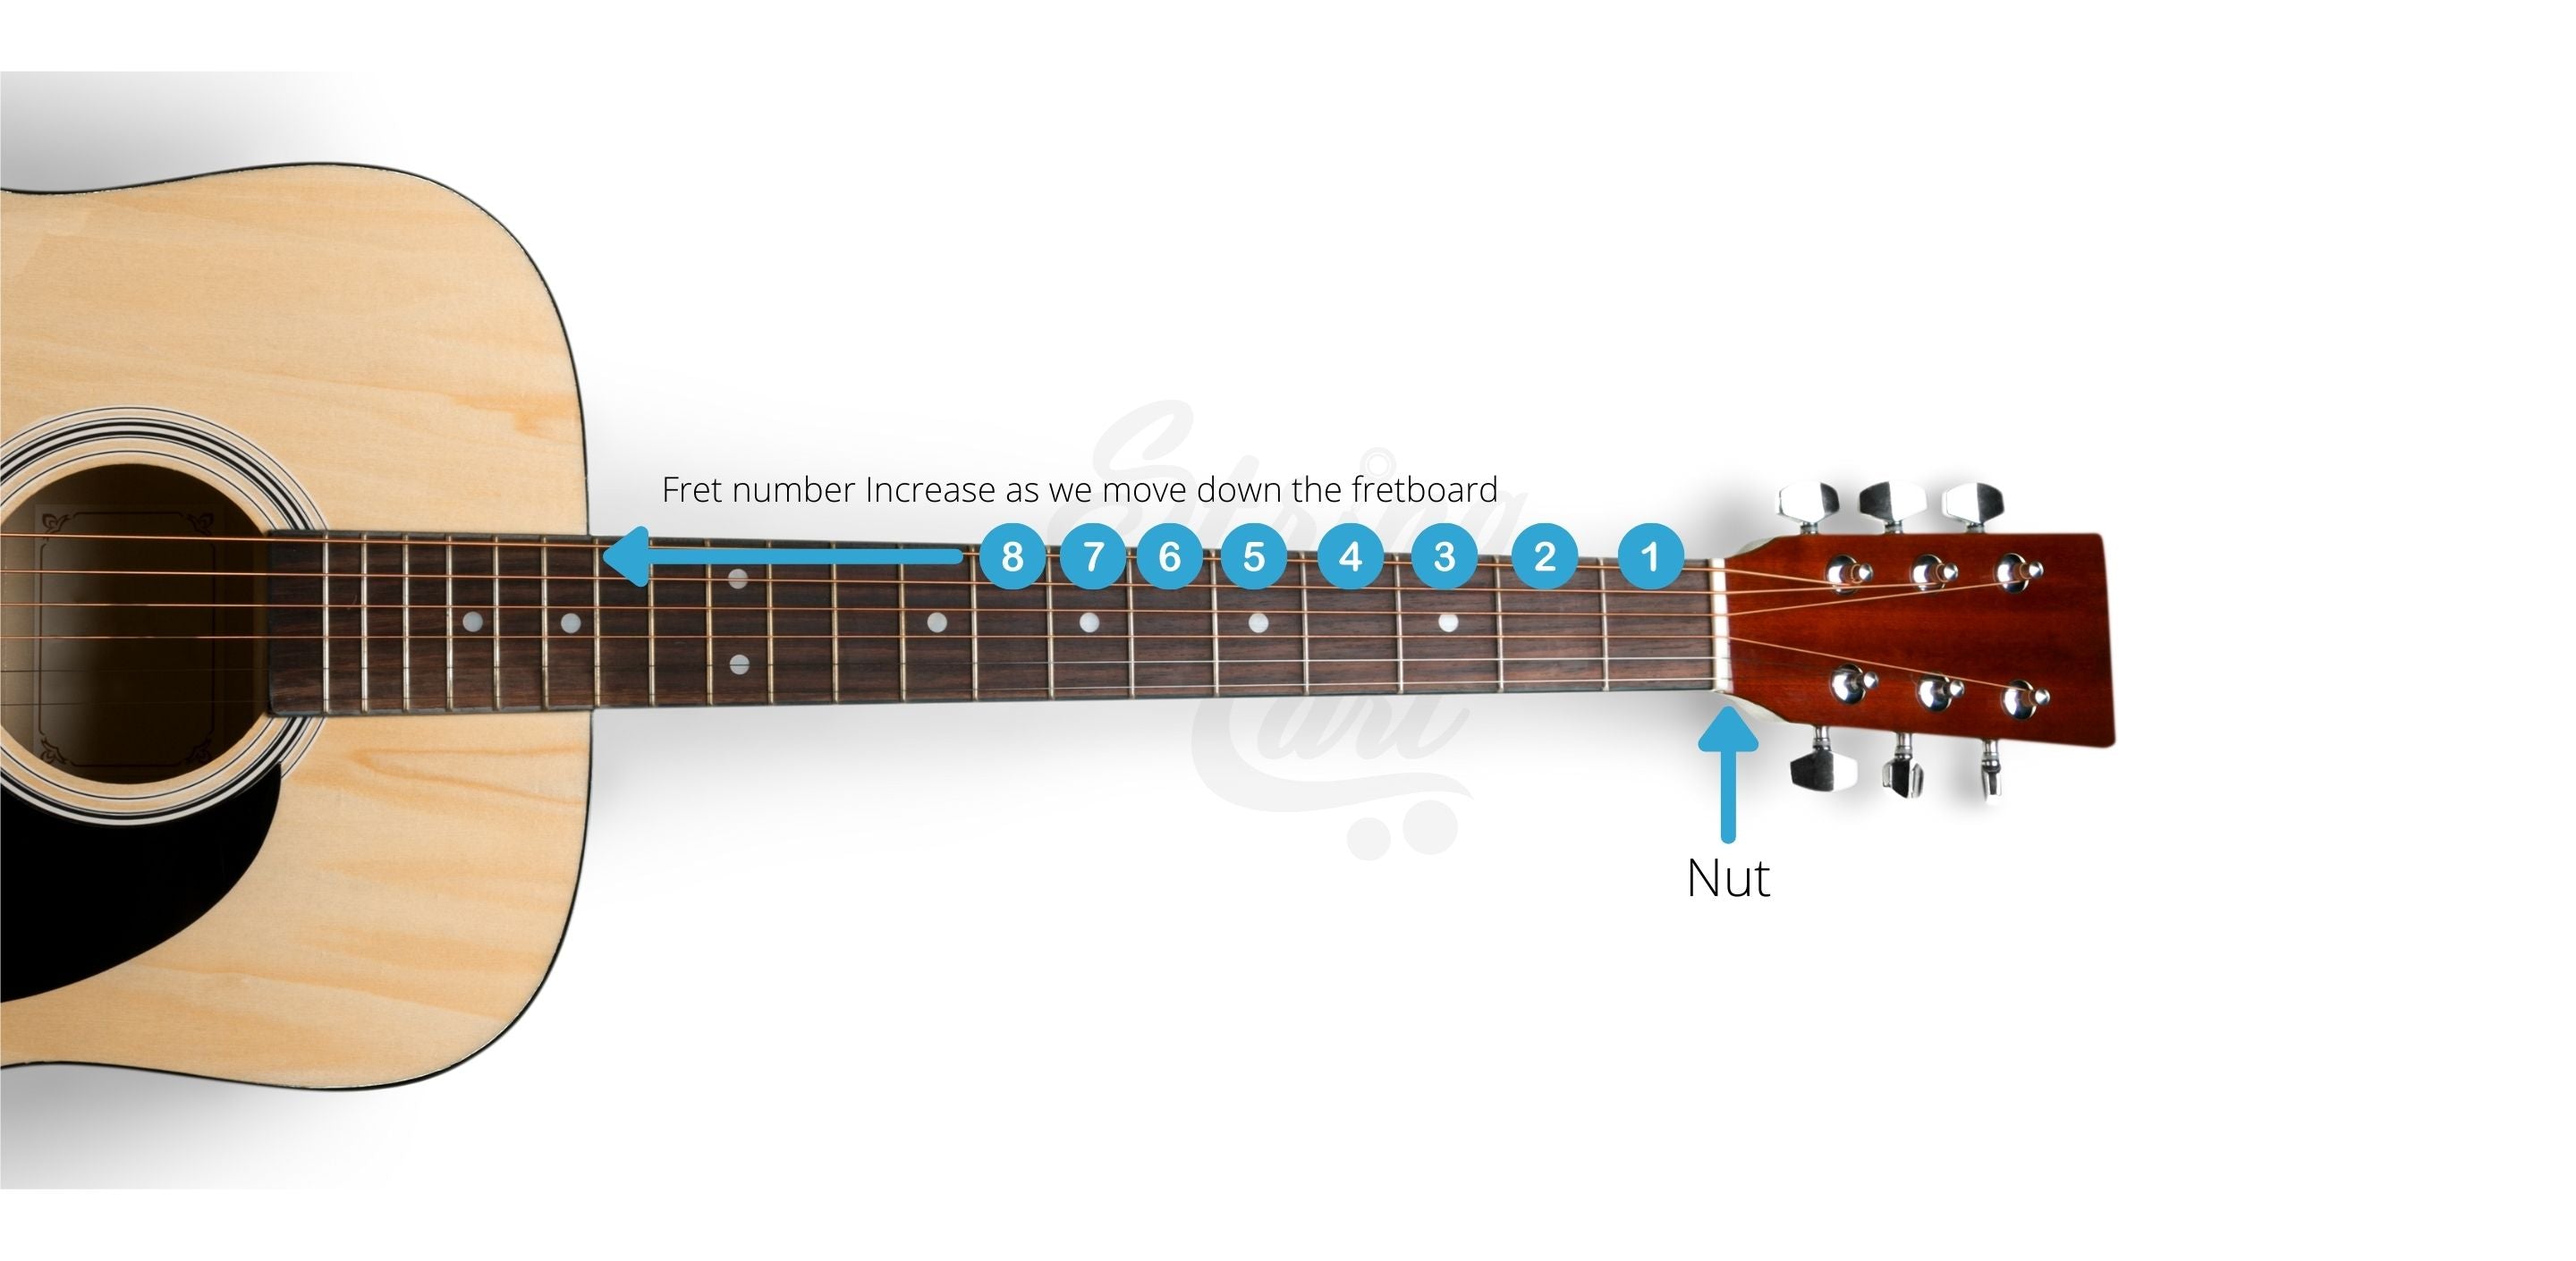 How Frets Are Numbered On A Guitar Neck